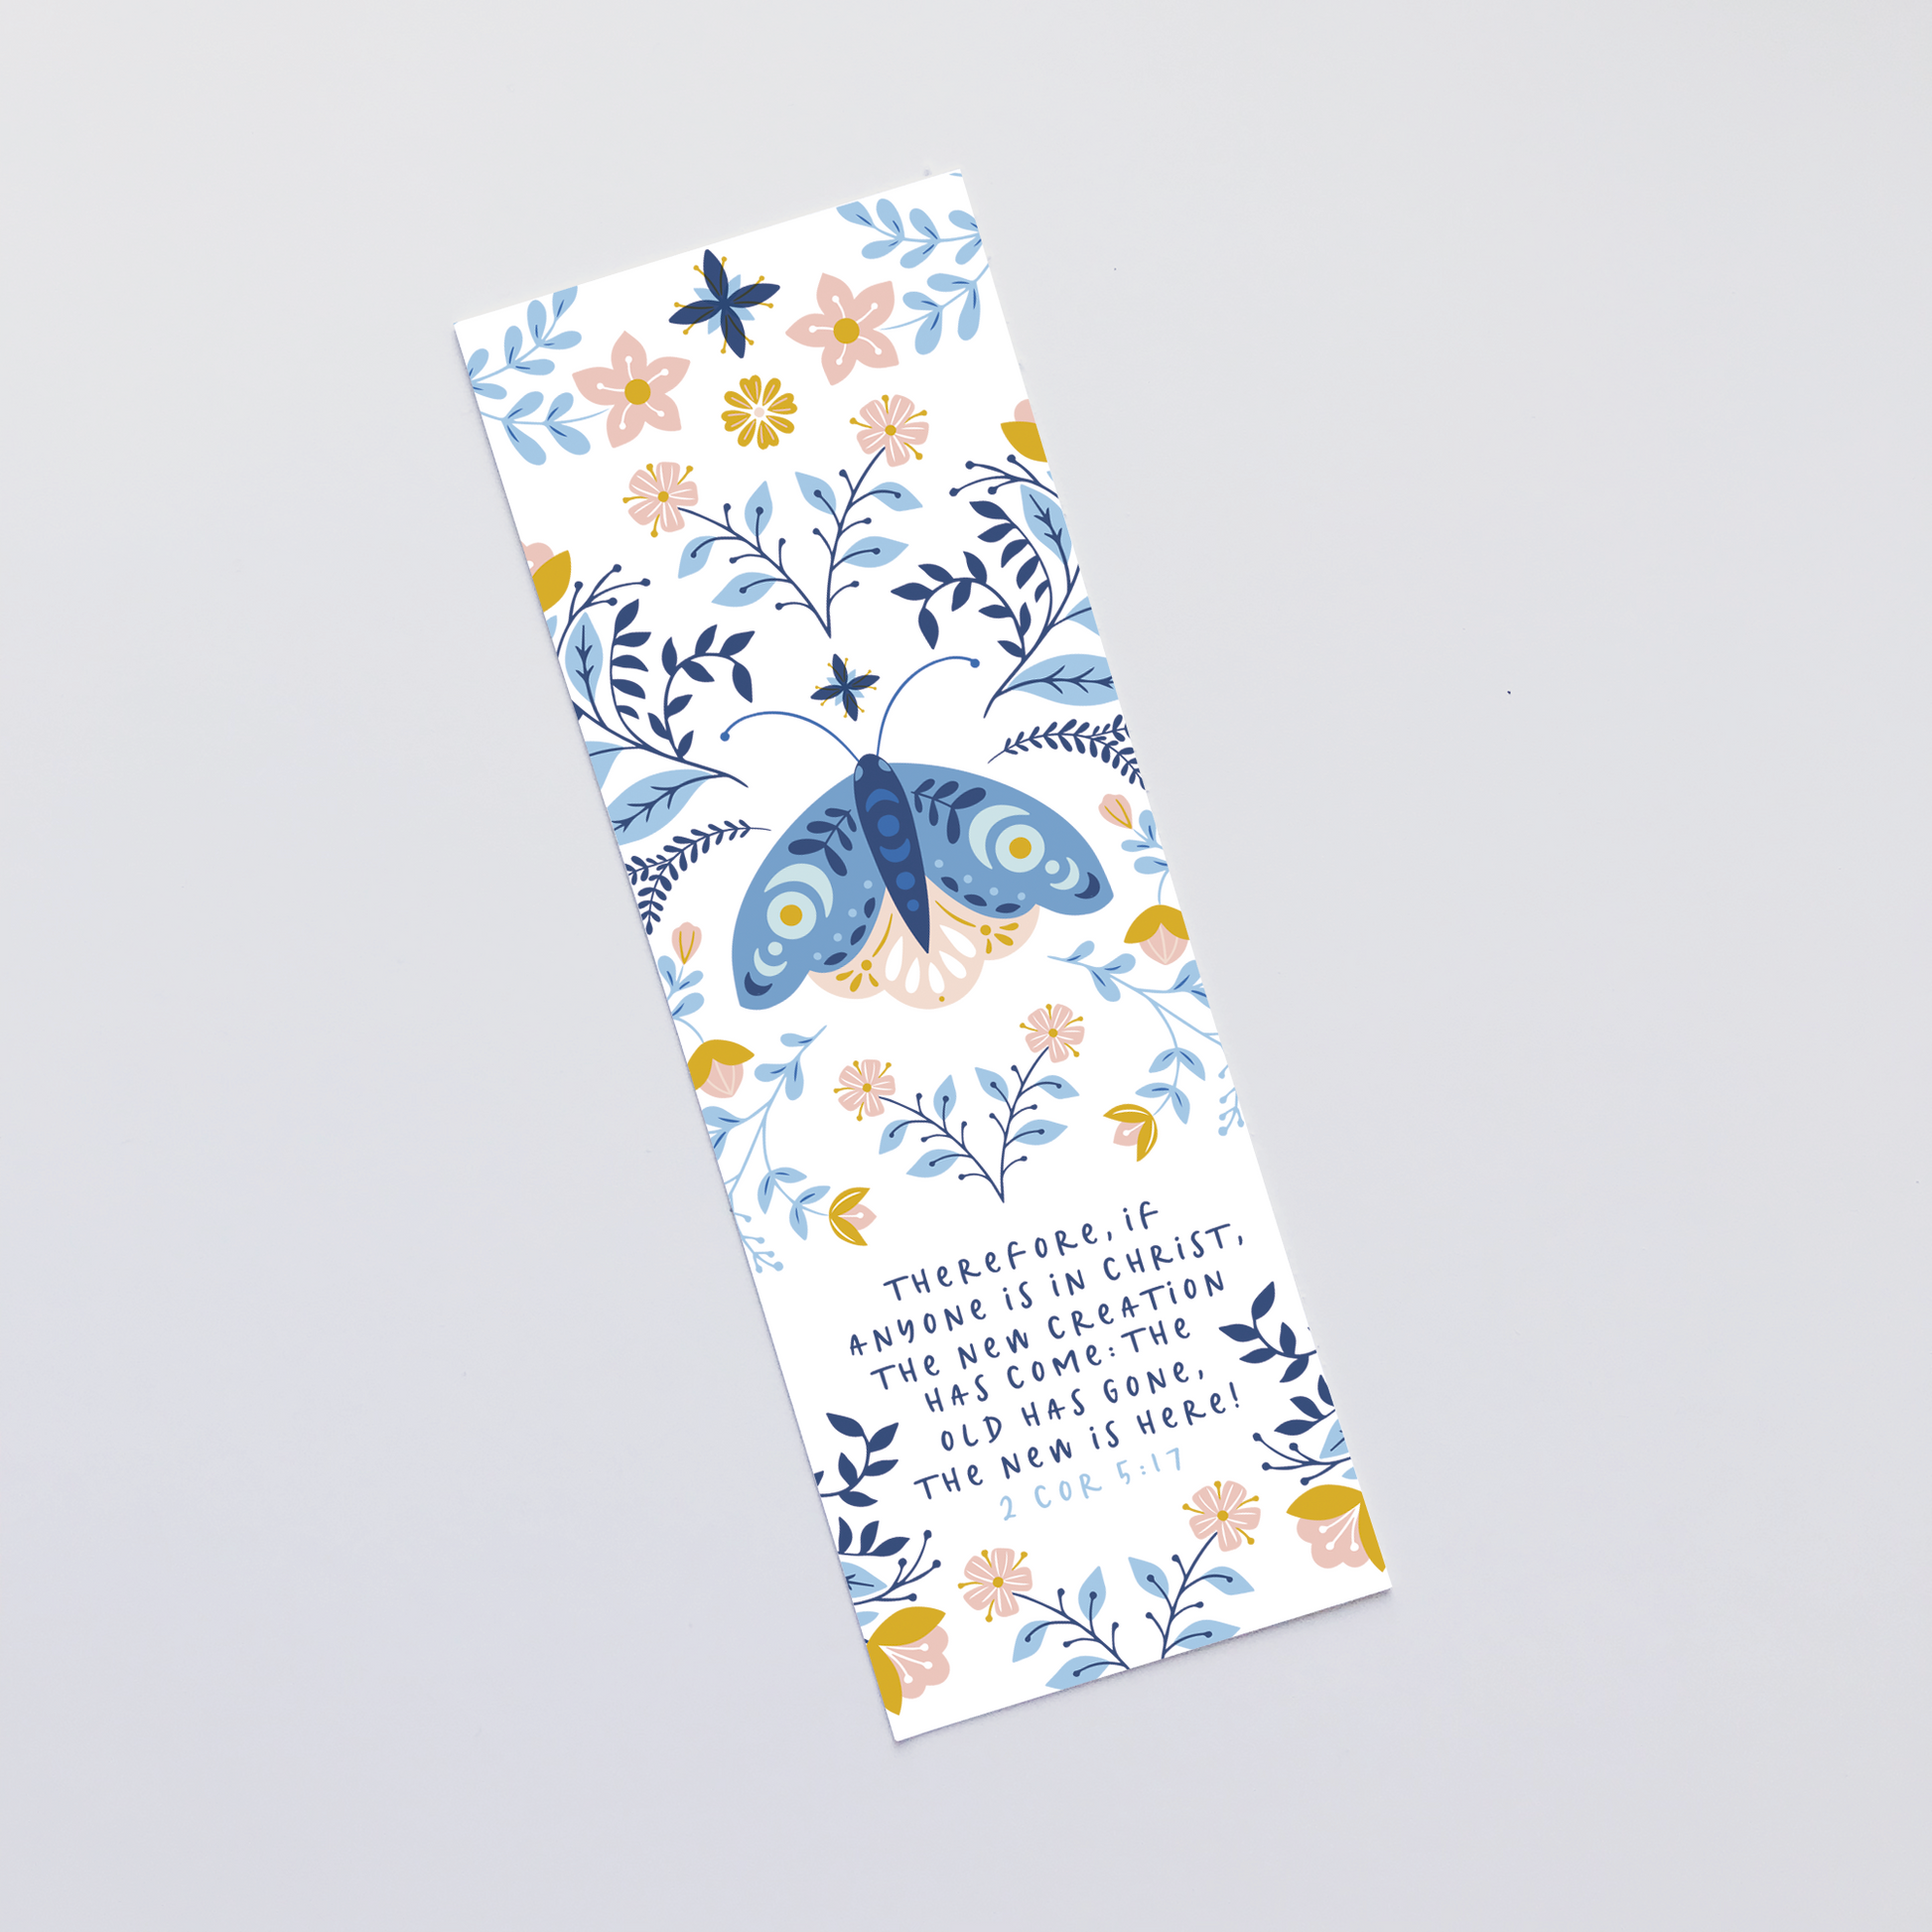 Christian Bookmark Gift - 2 Corinthians 5:17 The New Creation Has Come - The Wee Sparrow